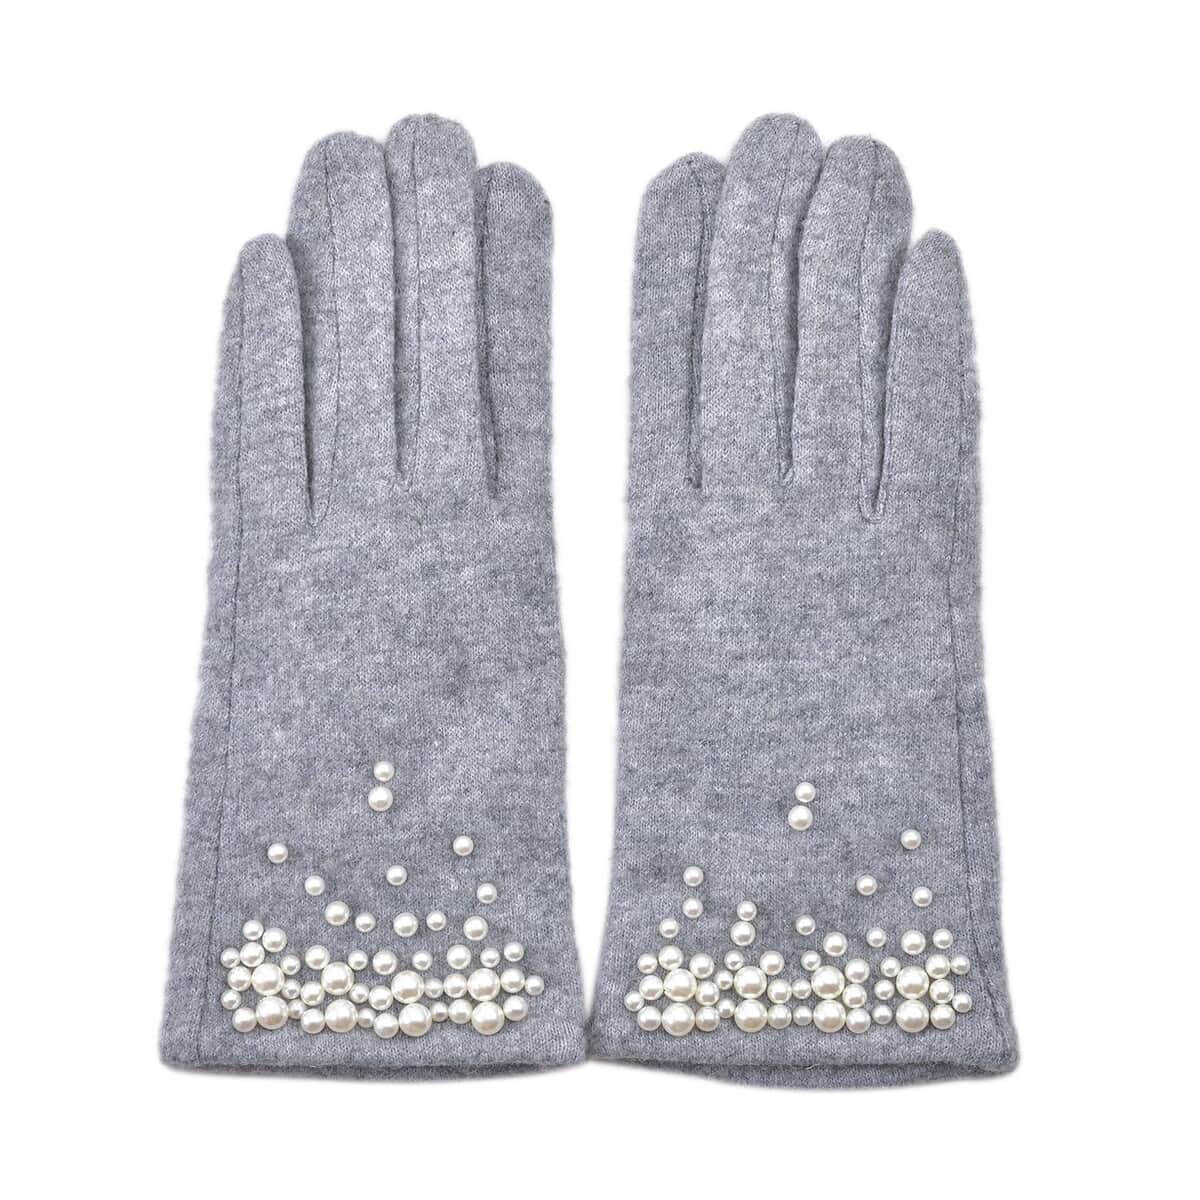 Grey Cashmere Warm Gloves with Bowknot and Equipped Touch Screen Friendly (9.2"x3.54") image number 4